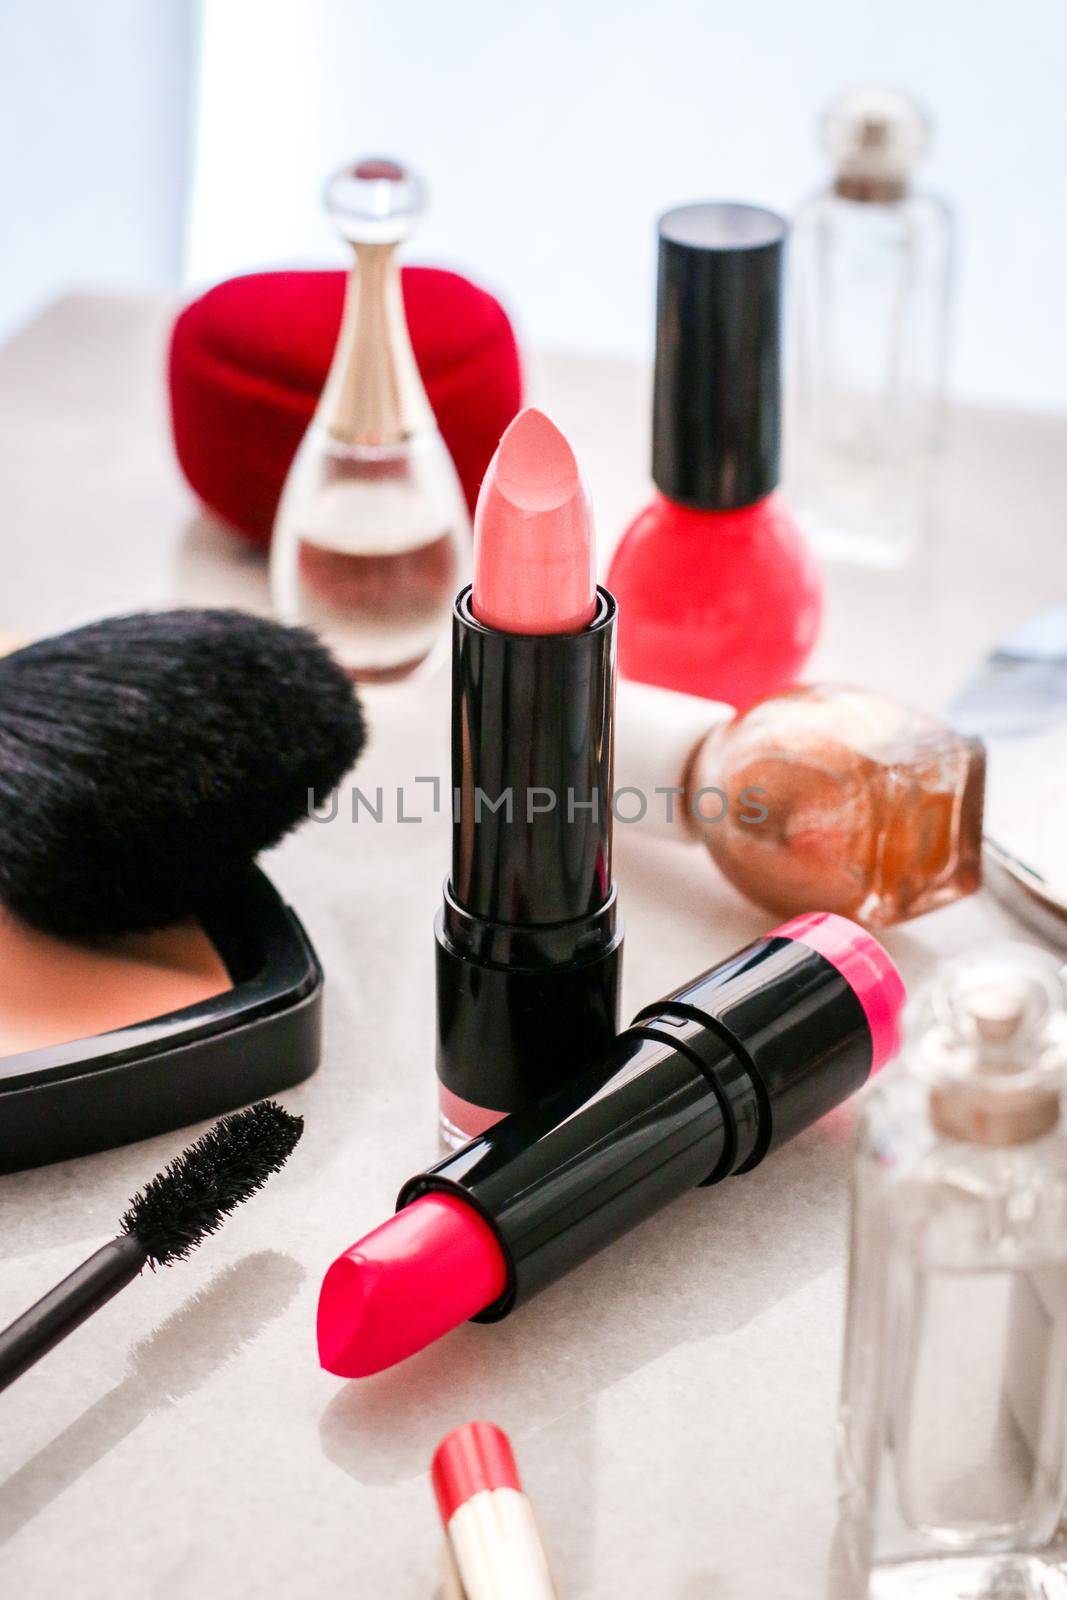 Modern feminine lifestyle, beauty blog and home decor concept – Luxury make-up and cosmetics on vanity table